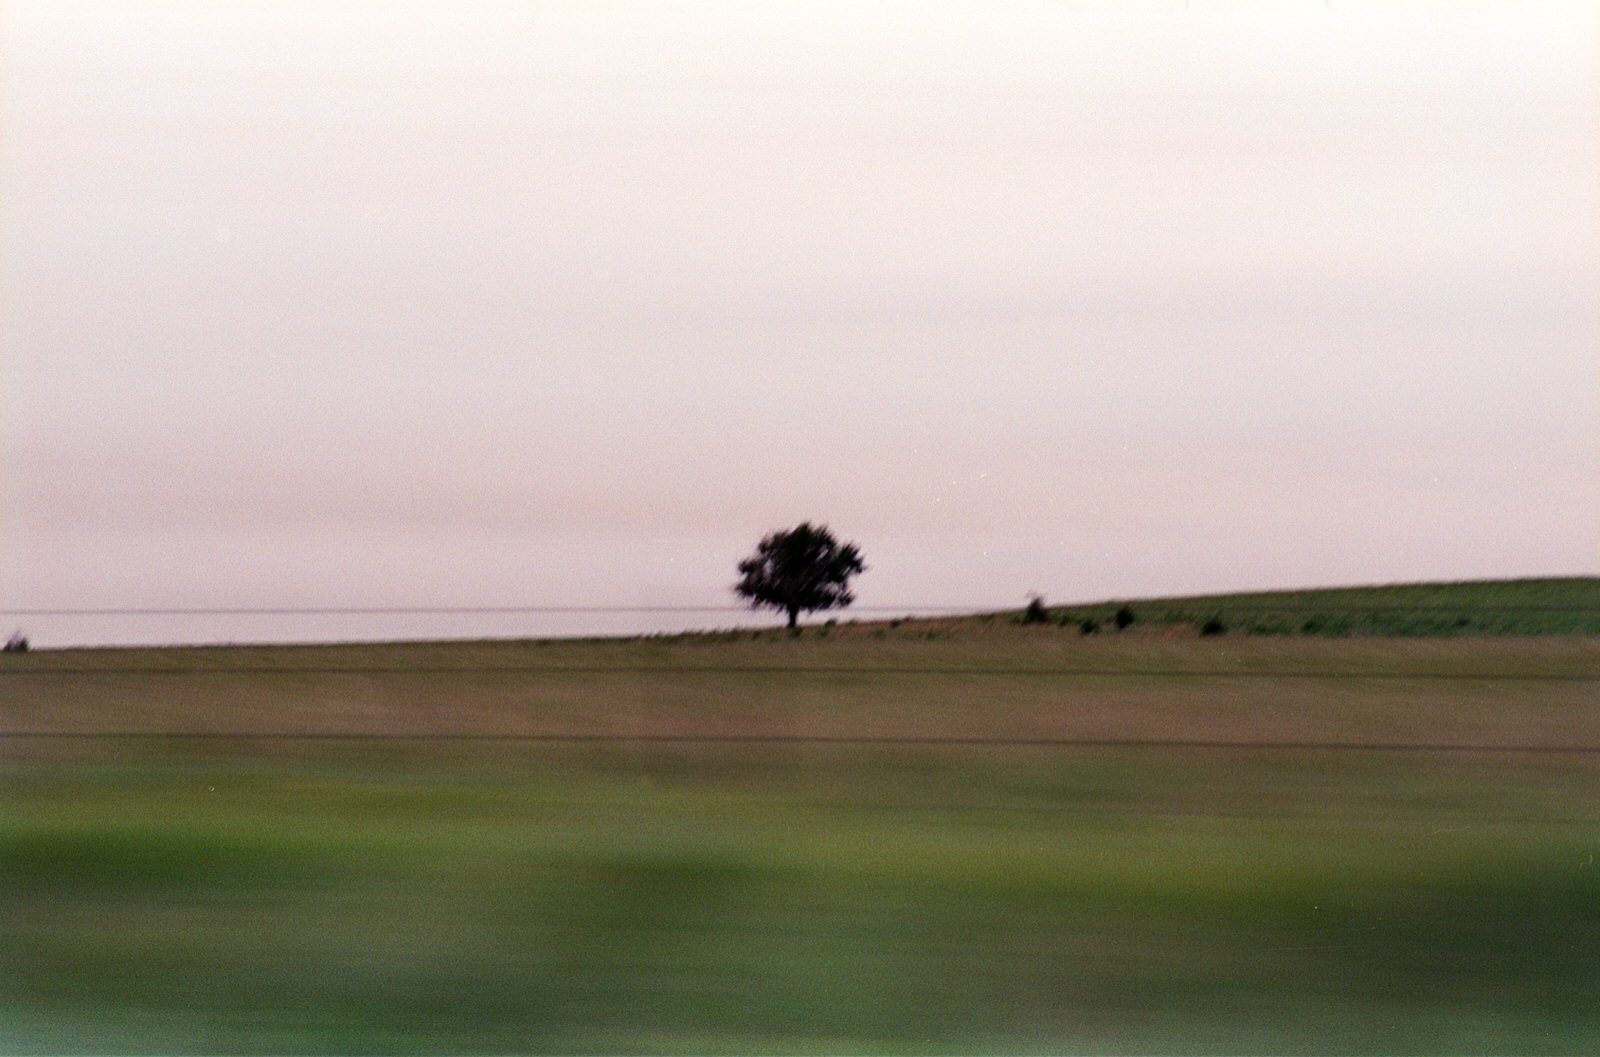 The stark loneliness of the lone tree in the vast open country.